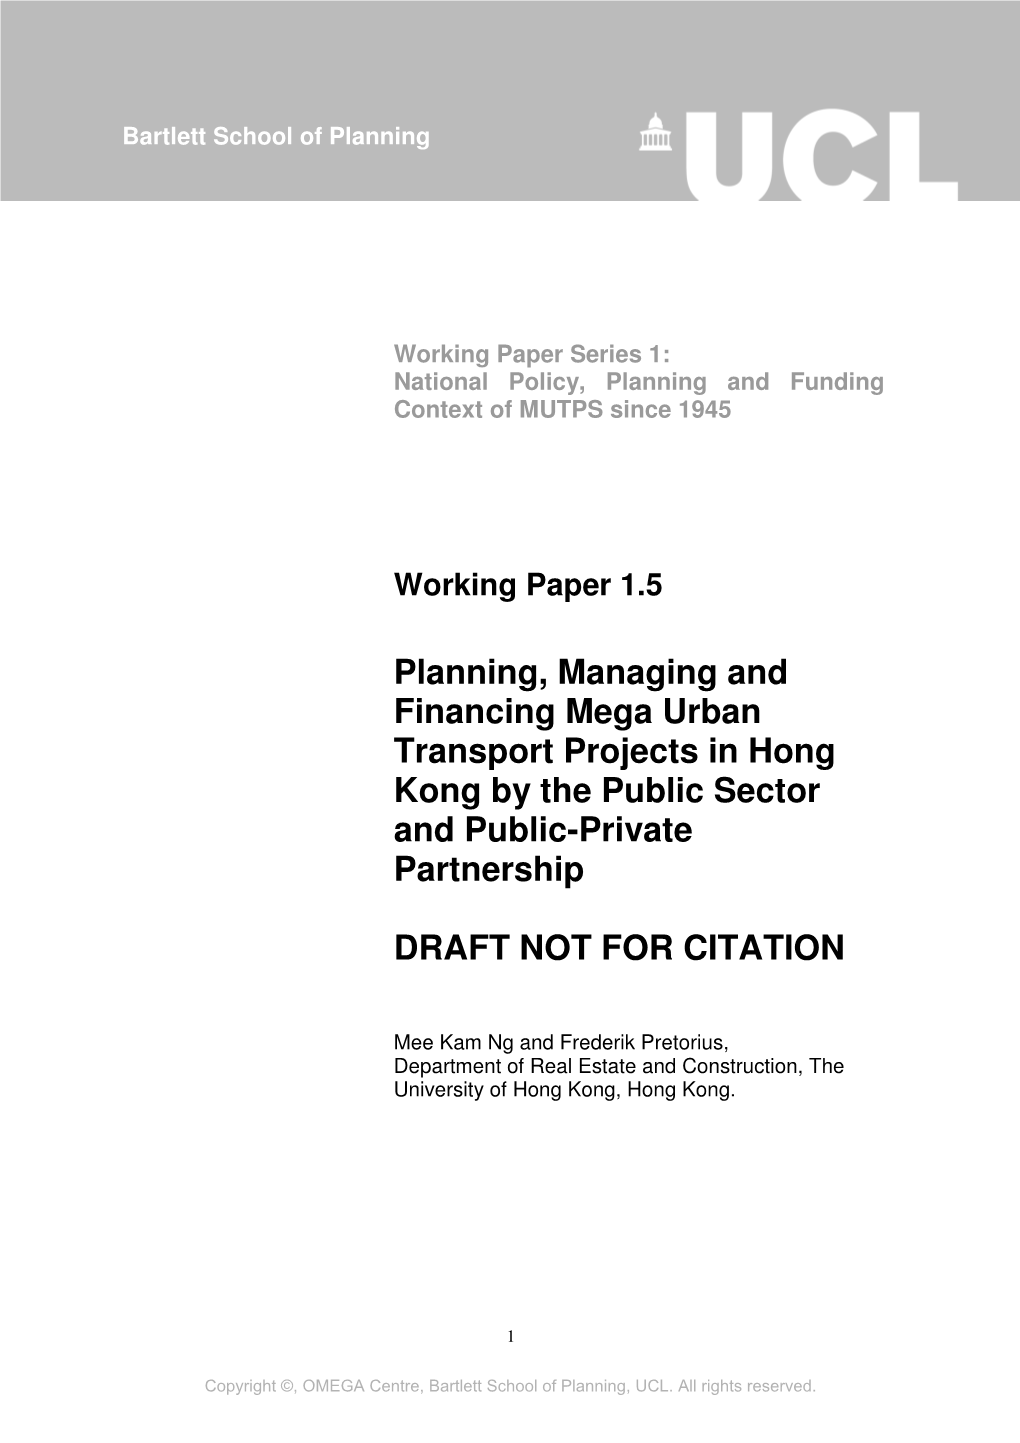 Planning, Managing and Financing Mega Urban Transport Projects in Hong Kong by the Public Sector and Public-Private Partnership